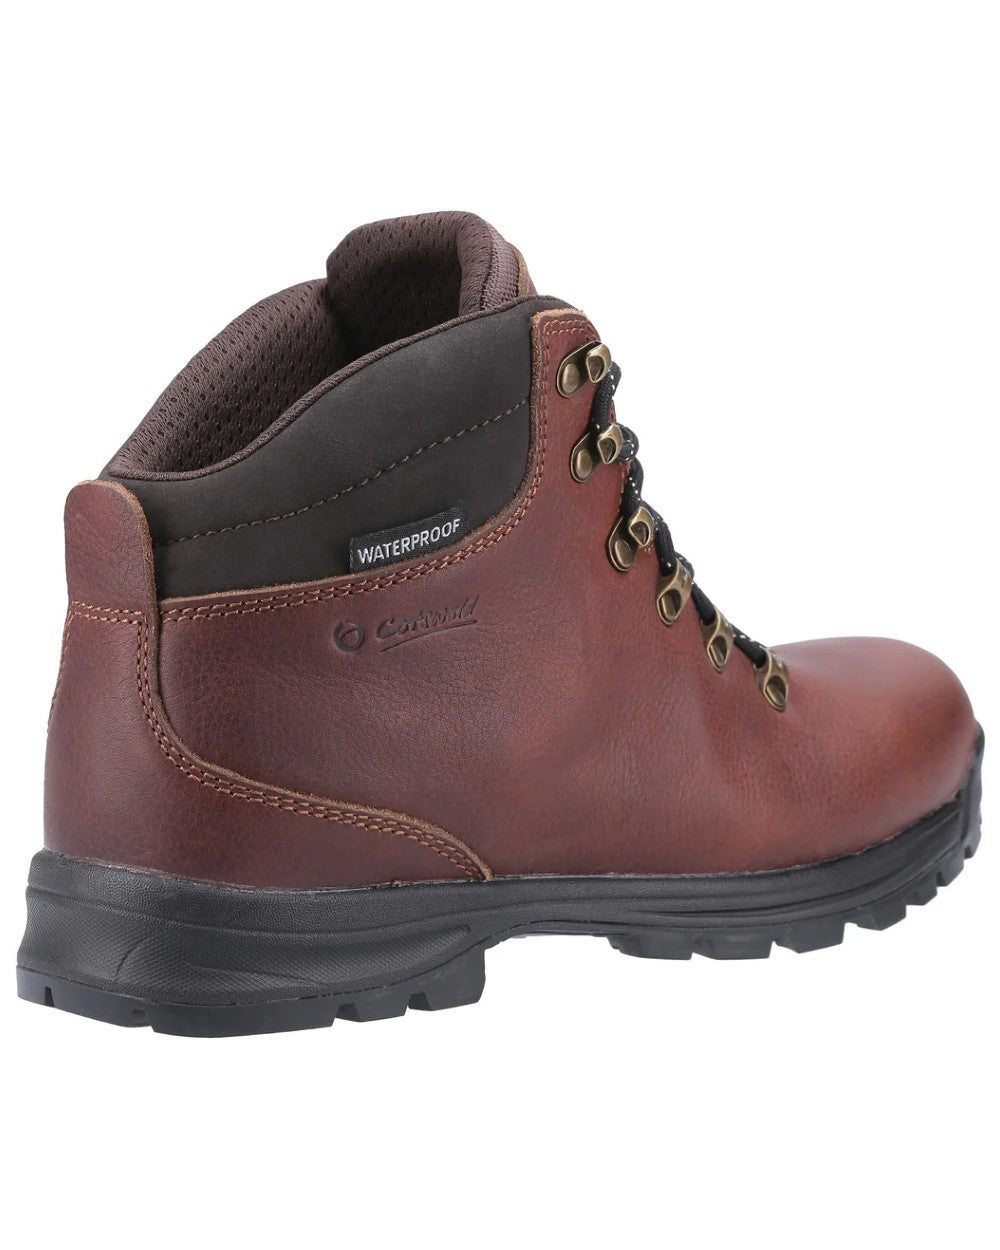 Cotswold Kingsway Hiking Shoes in Brown